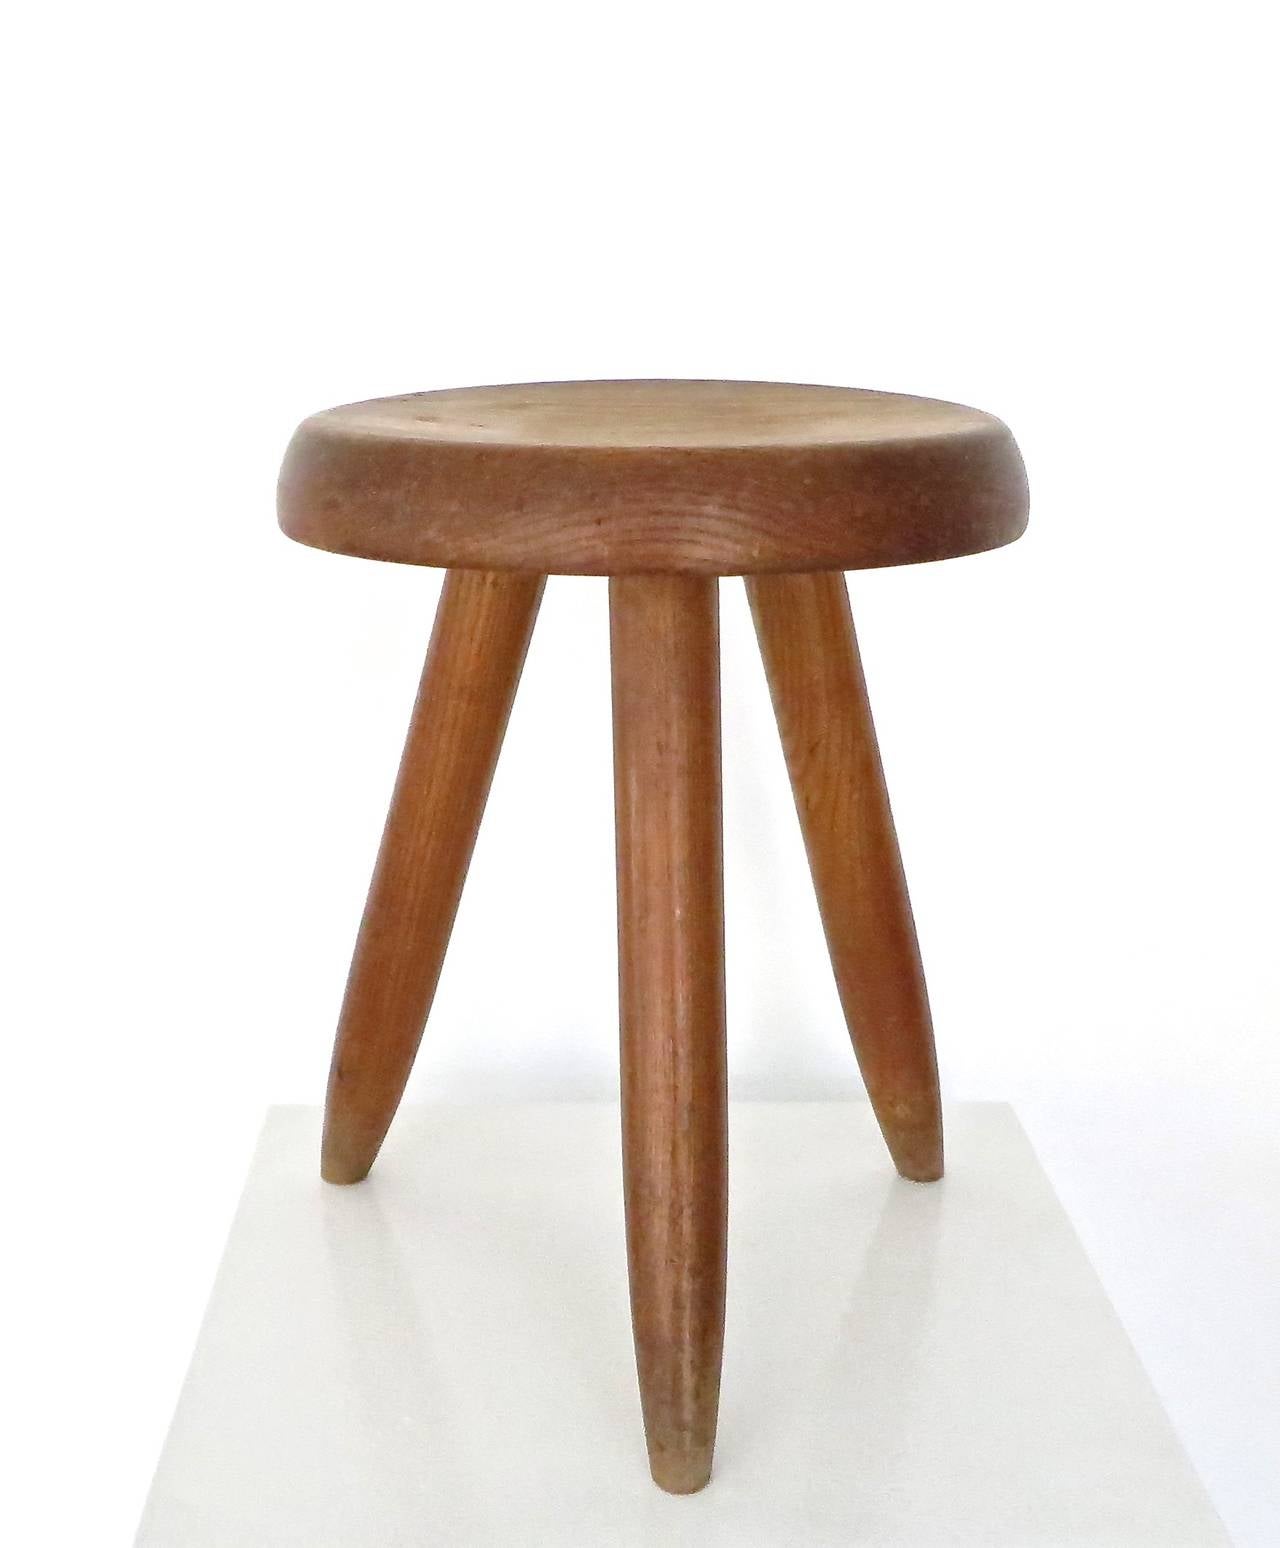 Charlotte Perriand stool editioned by Galerie Steph Simon.
Original patinae, oakwood. Very nice early stool.
As shown in Steph Simon: Retrospective 1956-1974, by Francois Laffanour, Galerie Downtown pg. 80-81.